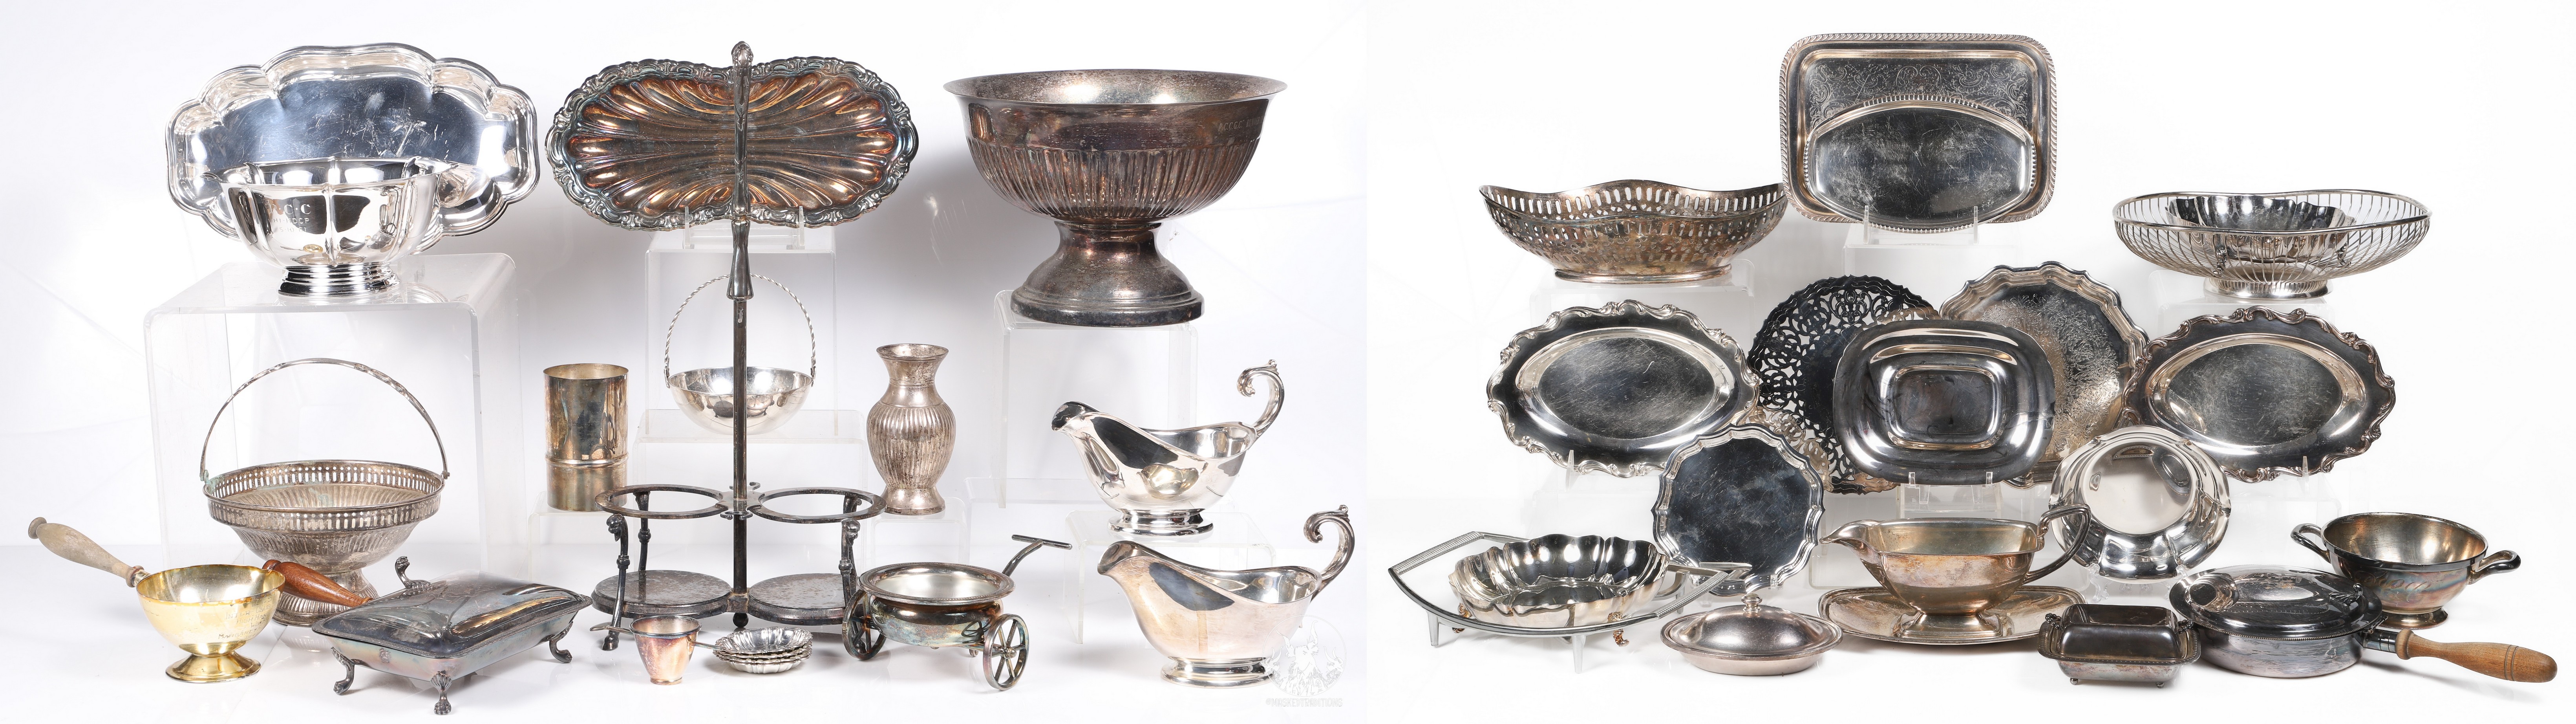 Large lot of silver plate, including